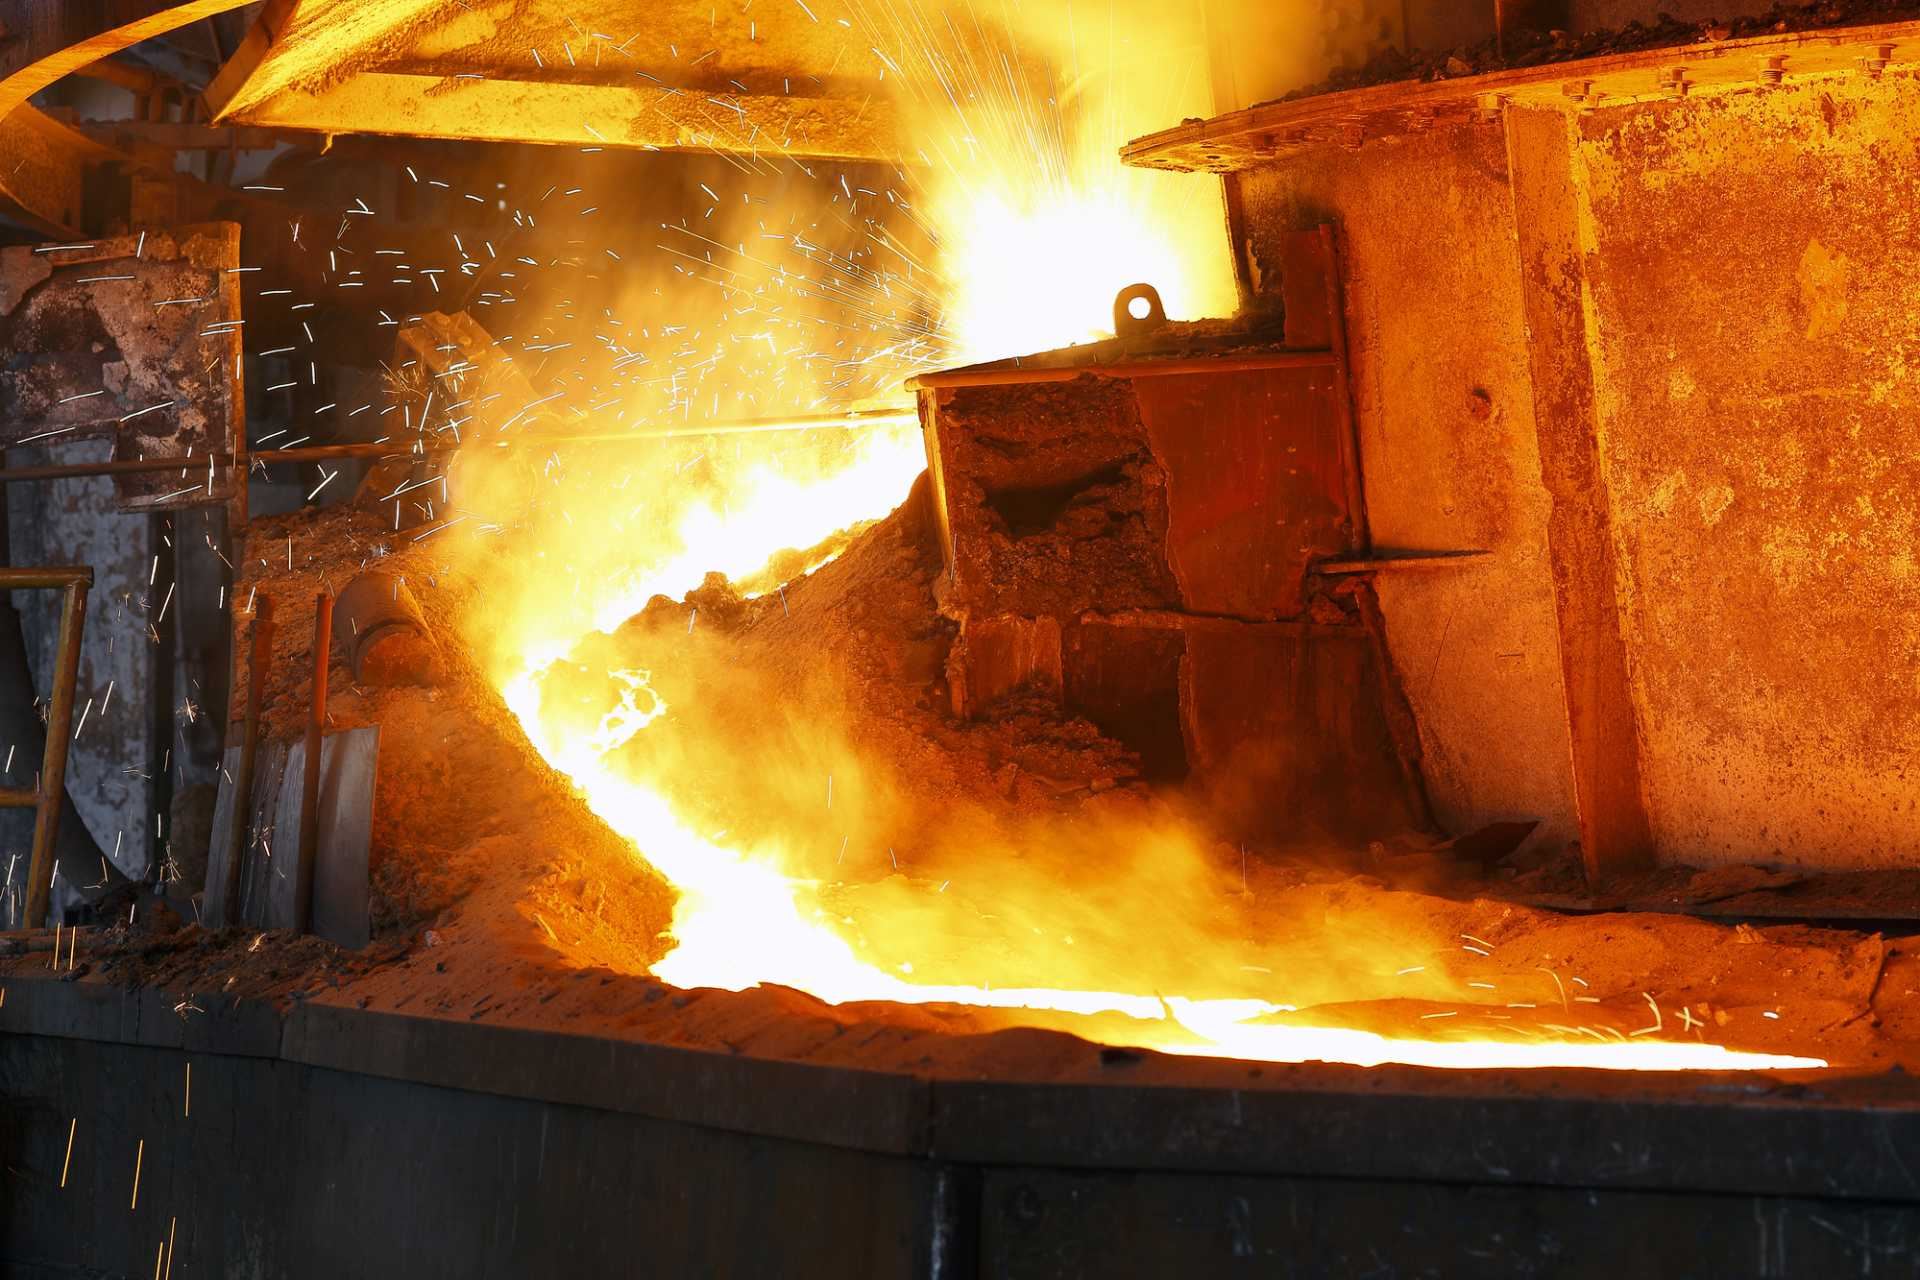 UK steel industry faces high electricity costs